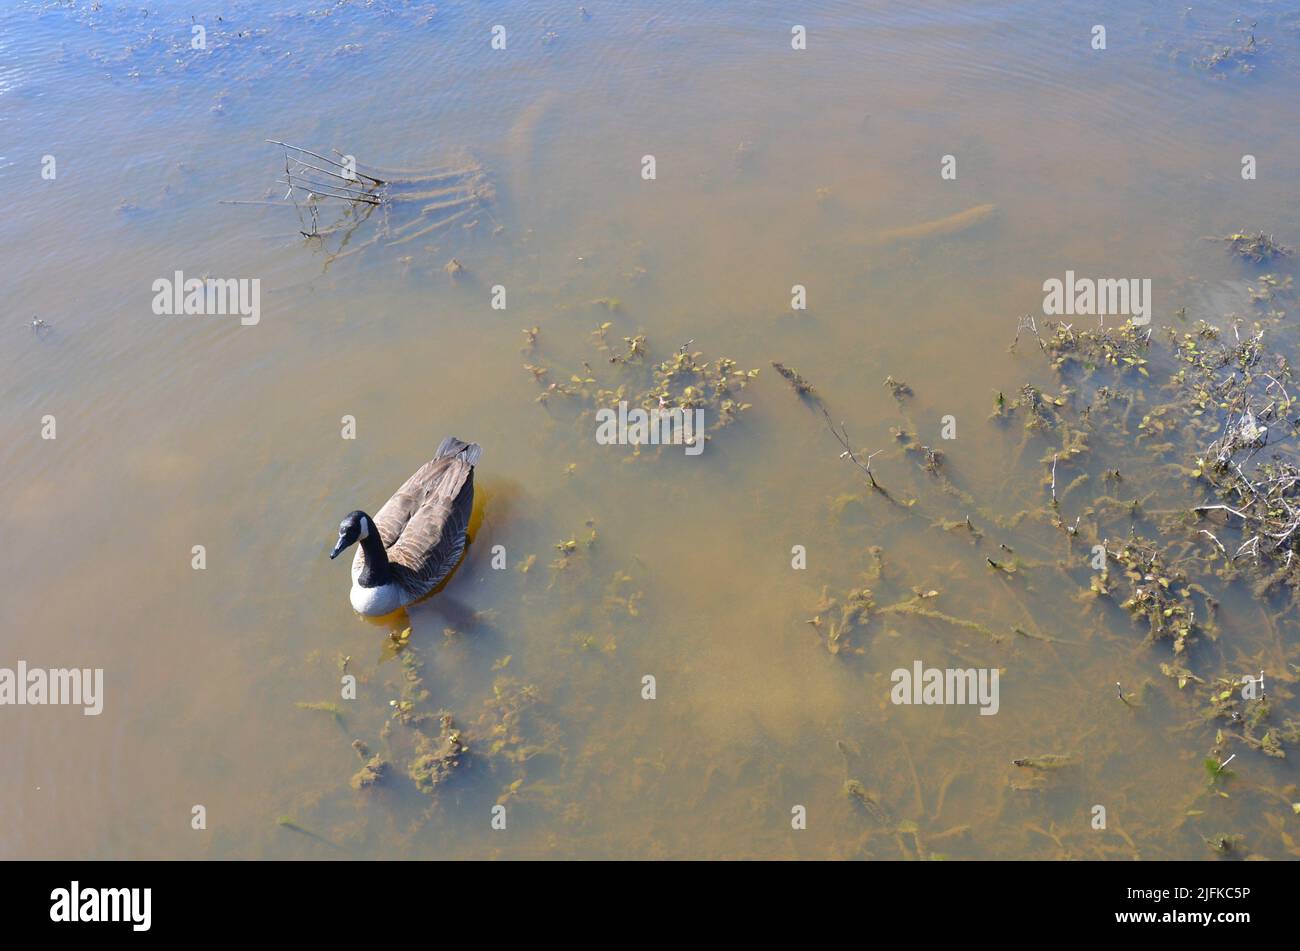 goose swimming in dark or murky water with plants. Stock Photo